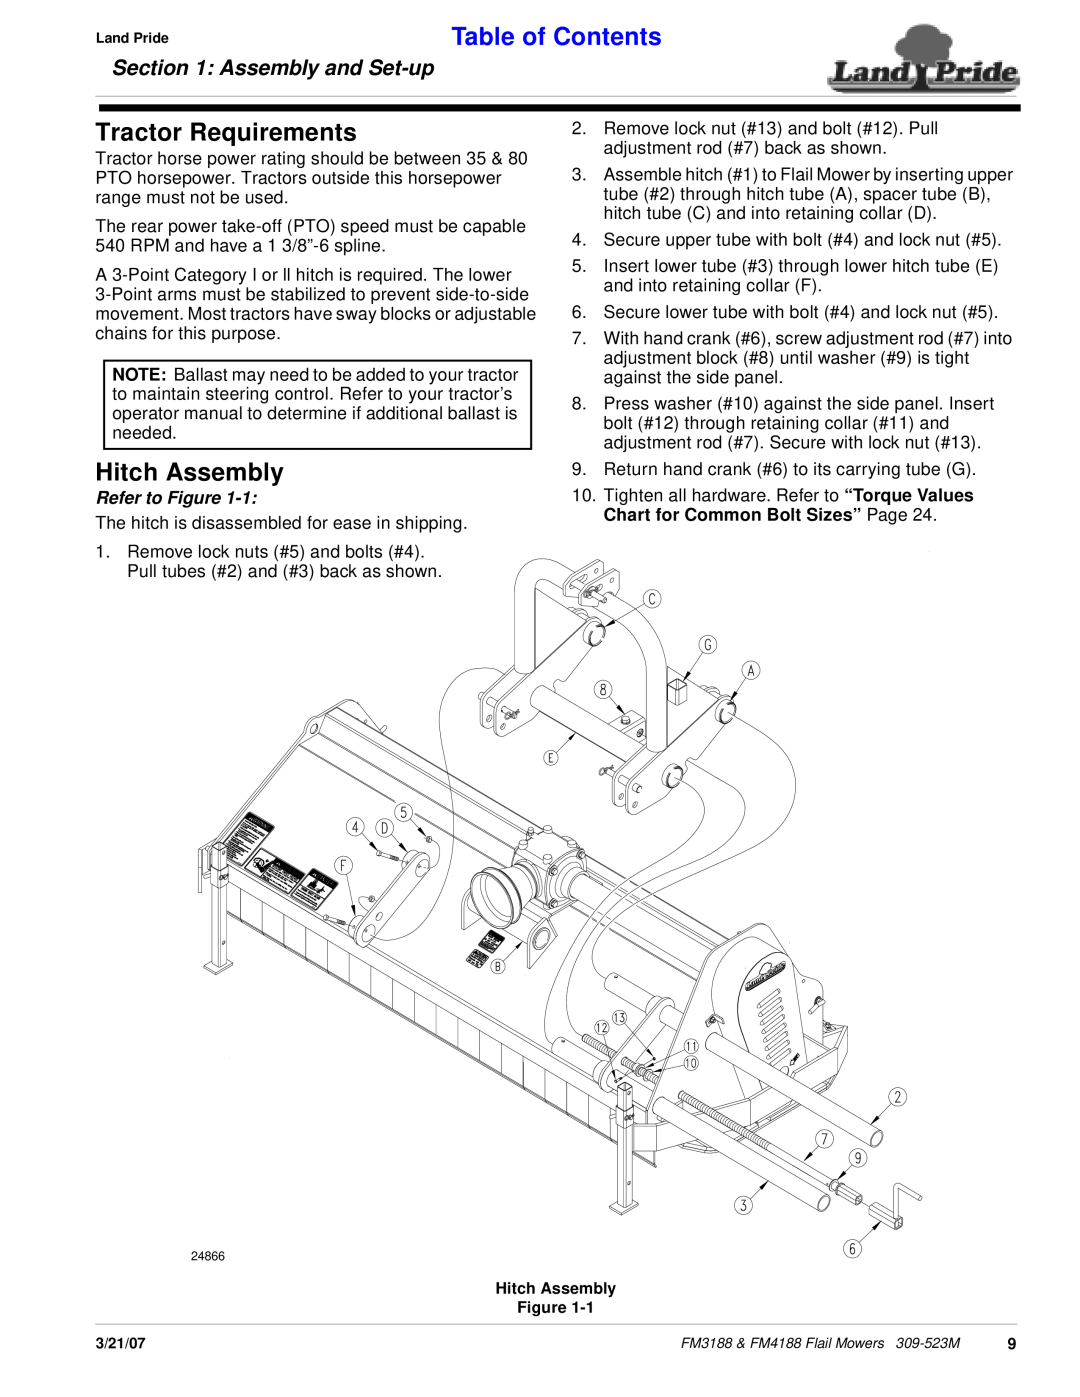 Land Pride FM3188, FM4188 Tractor Requirements, Hitch Assembly, Table of Contents, Assembly and Set-up, Refer to Figure 